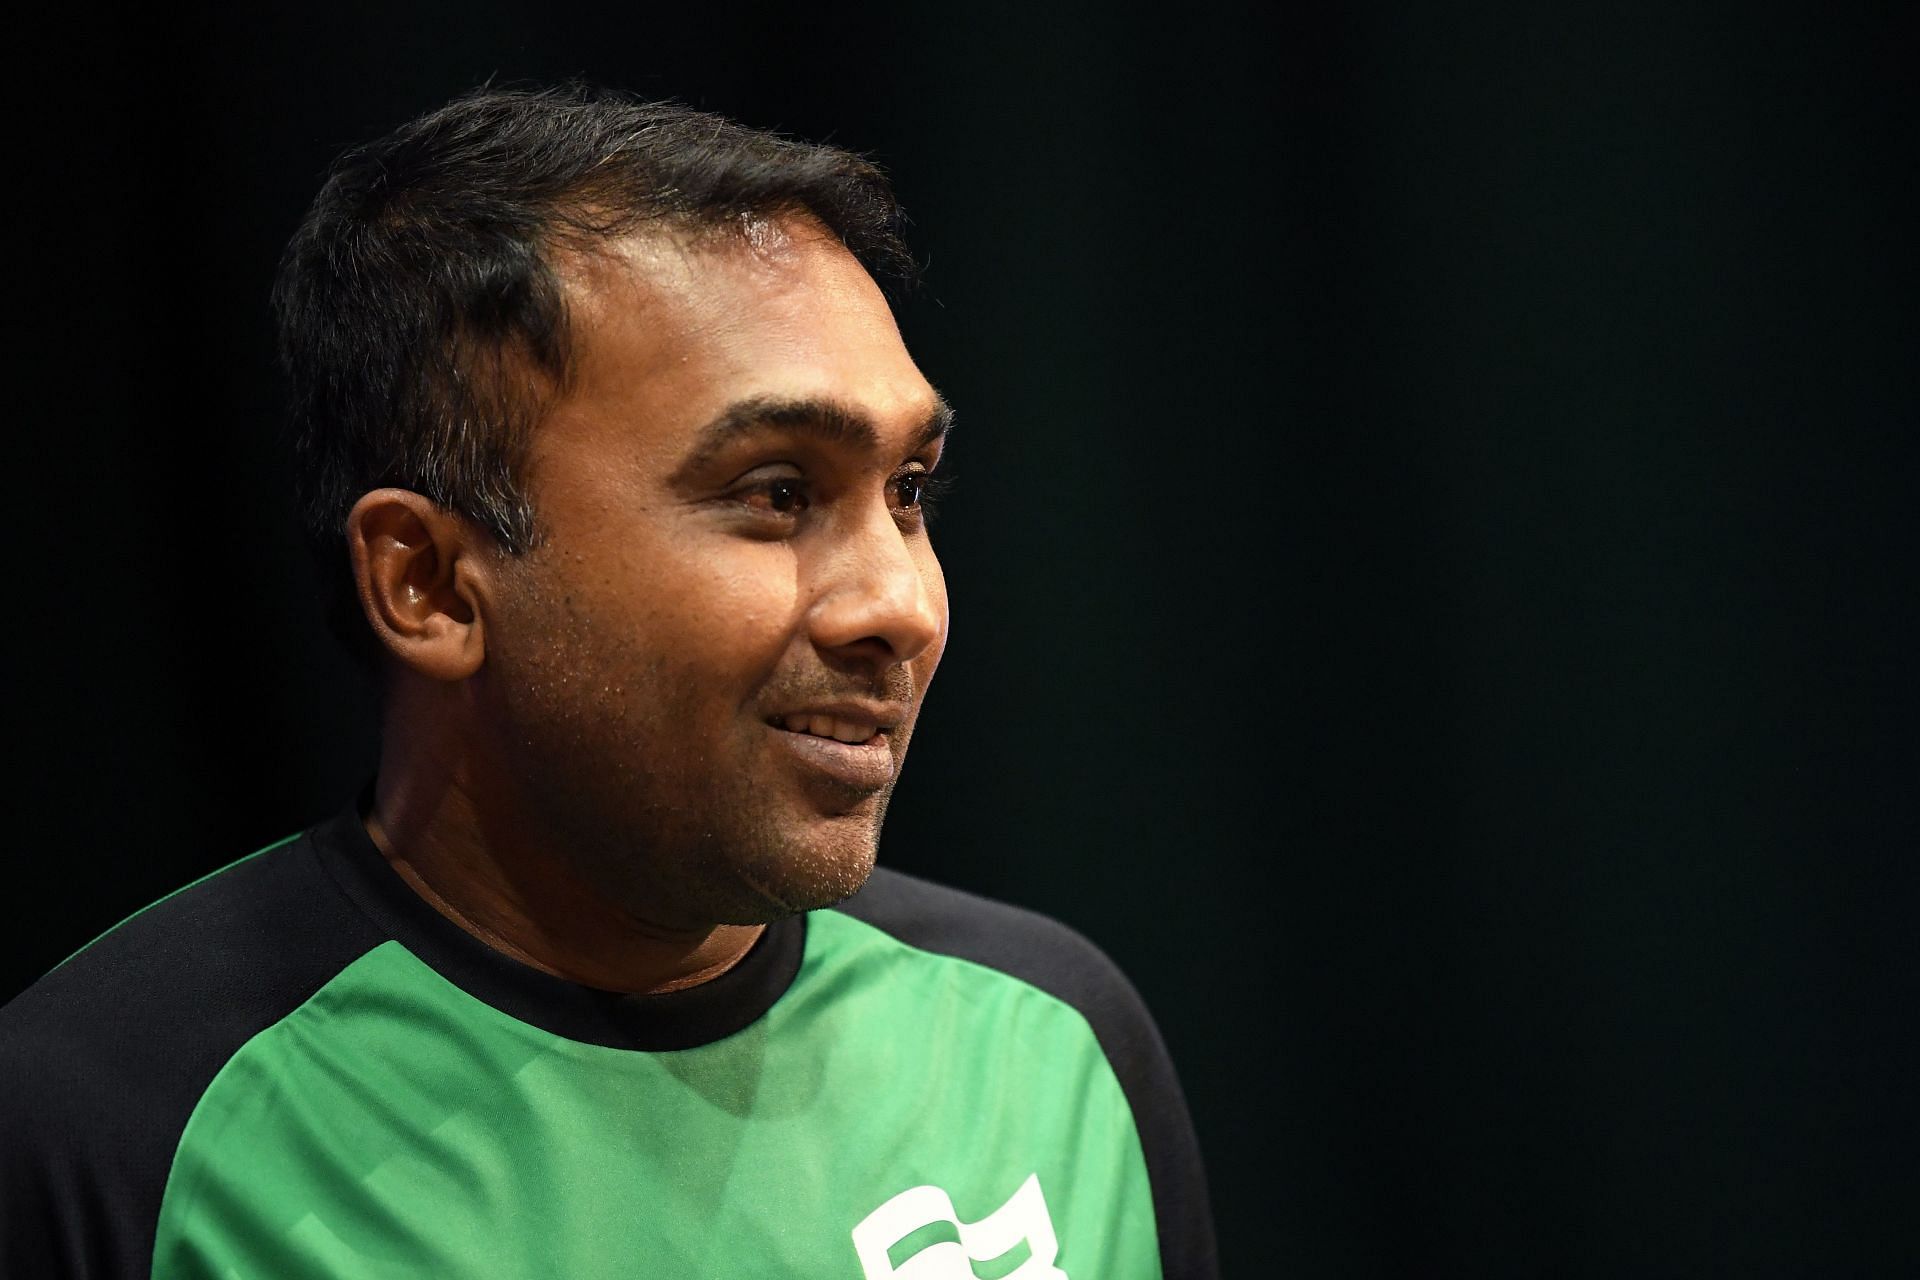 Mahela Jayawardena has evolved to be a renowned coach since his retirement as a player